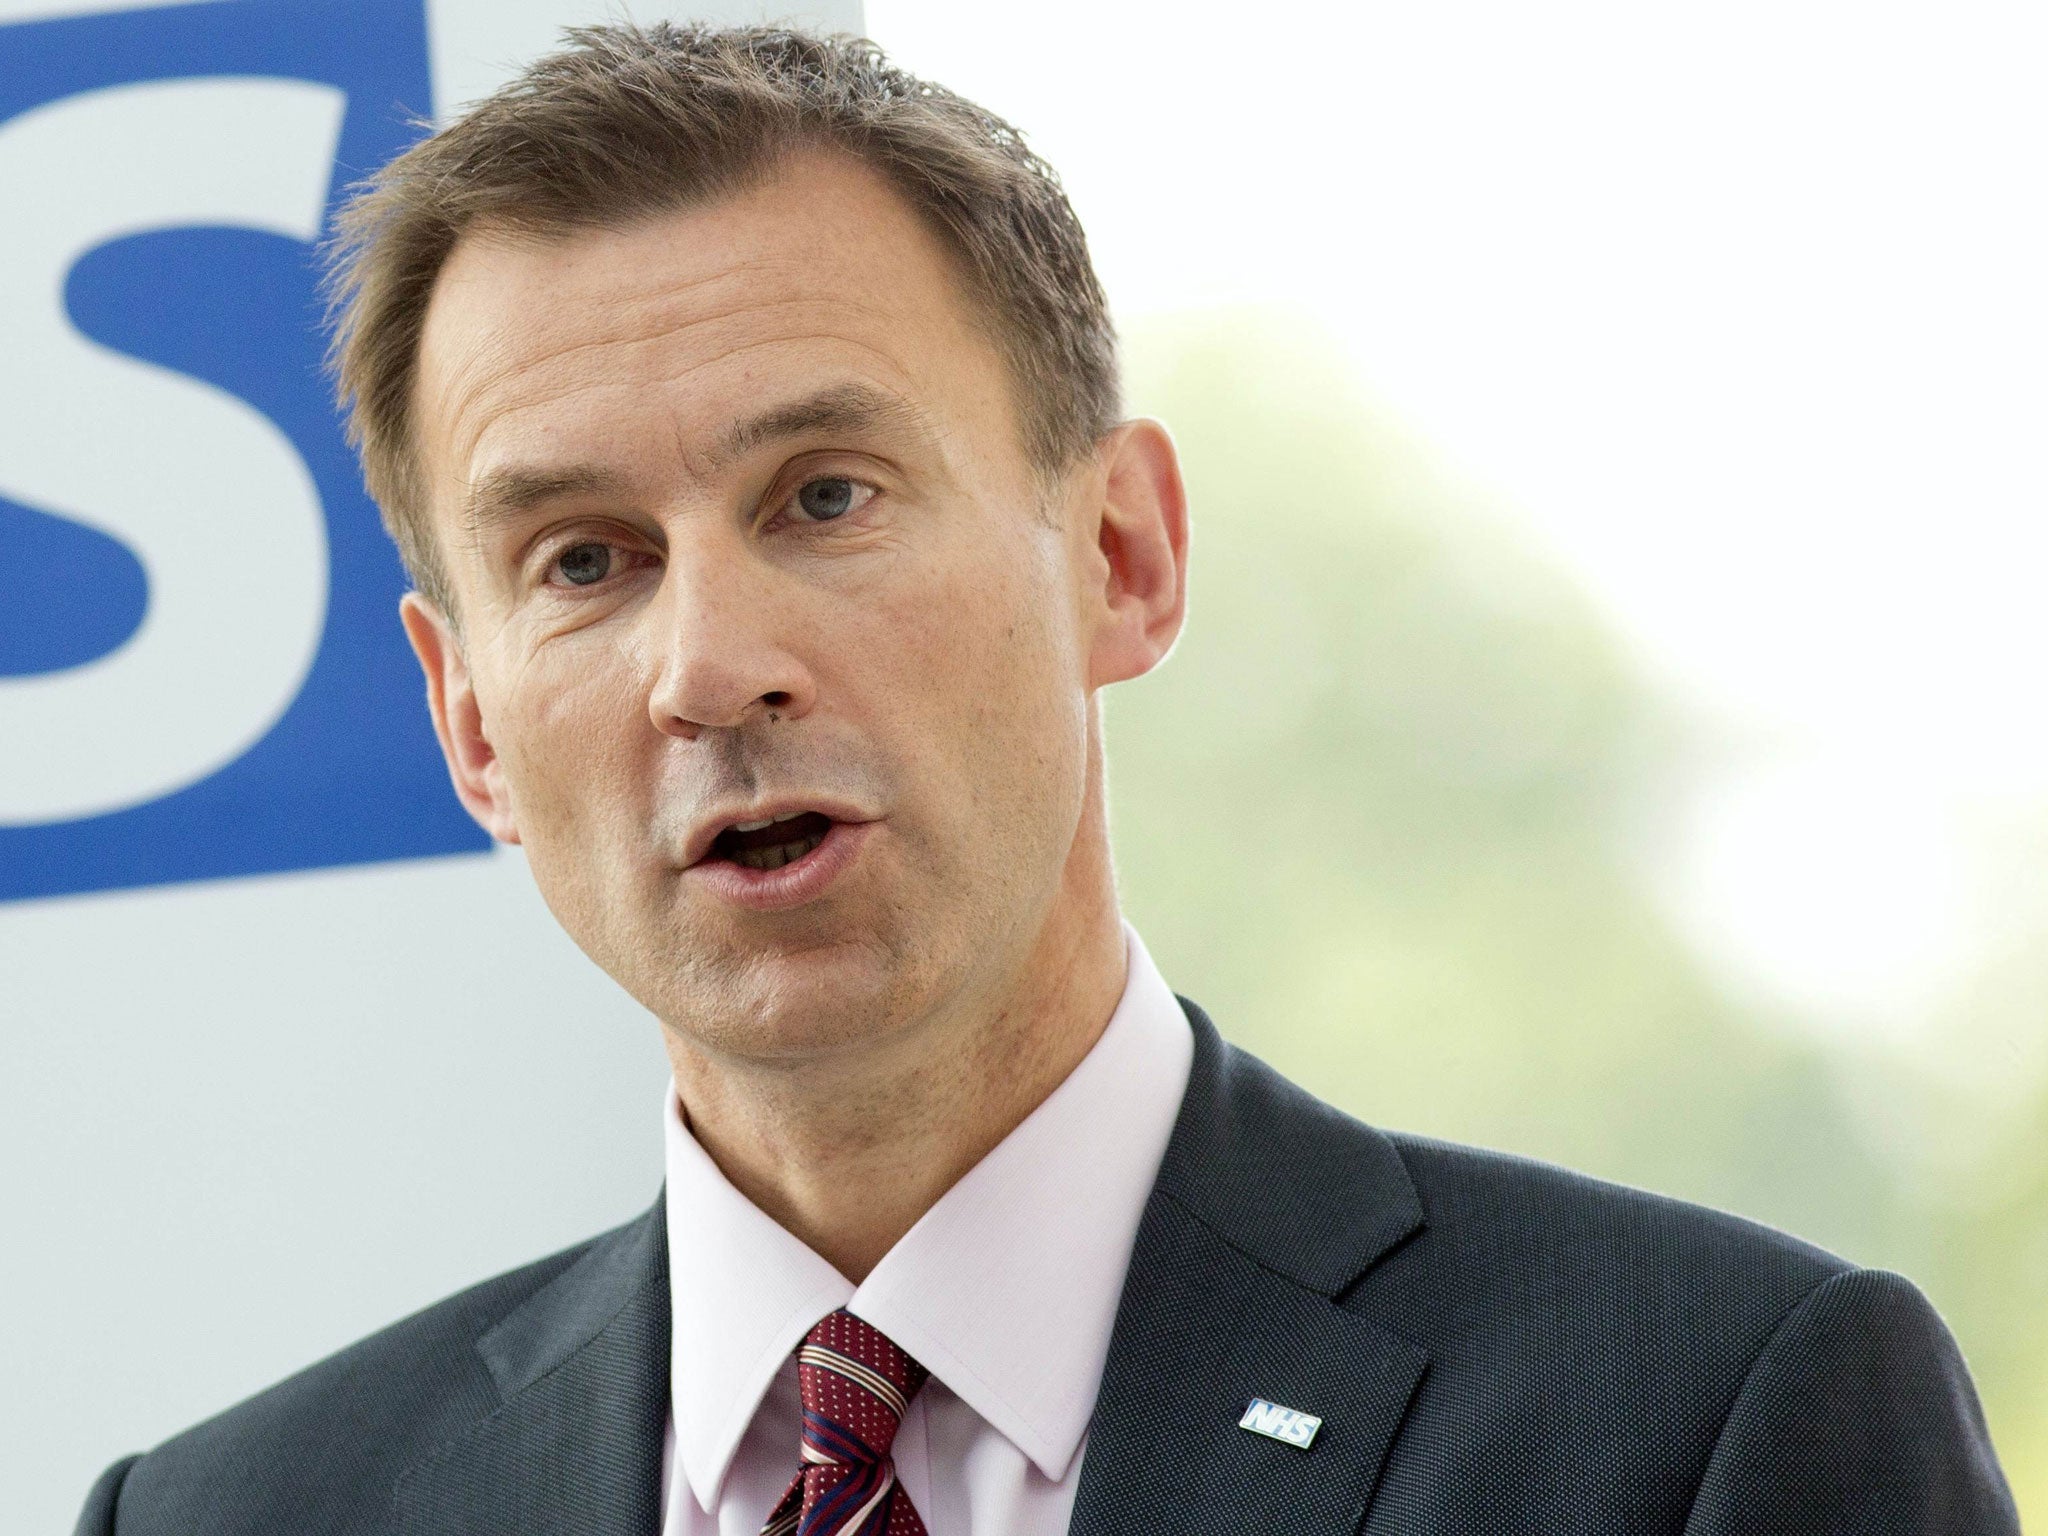 Jeremy Hunt has been criticised for presiding over staff cuts